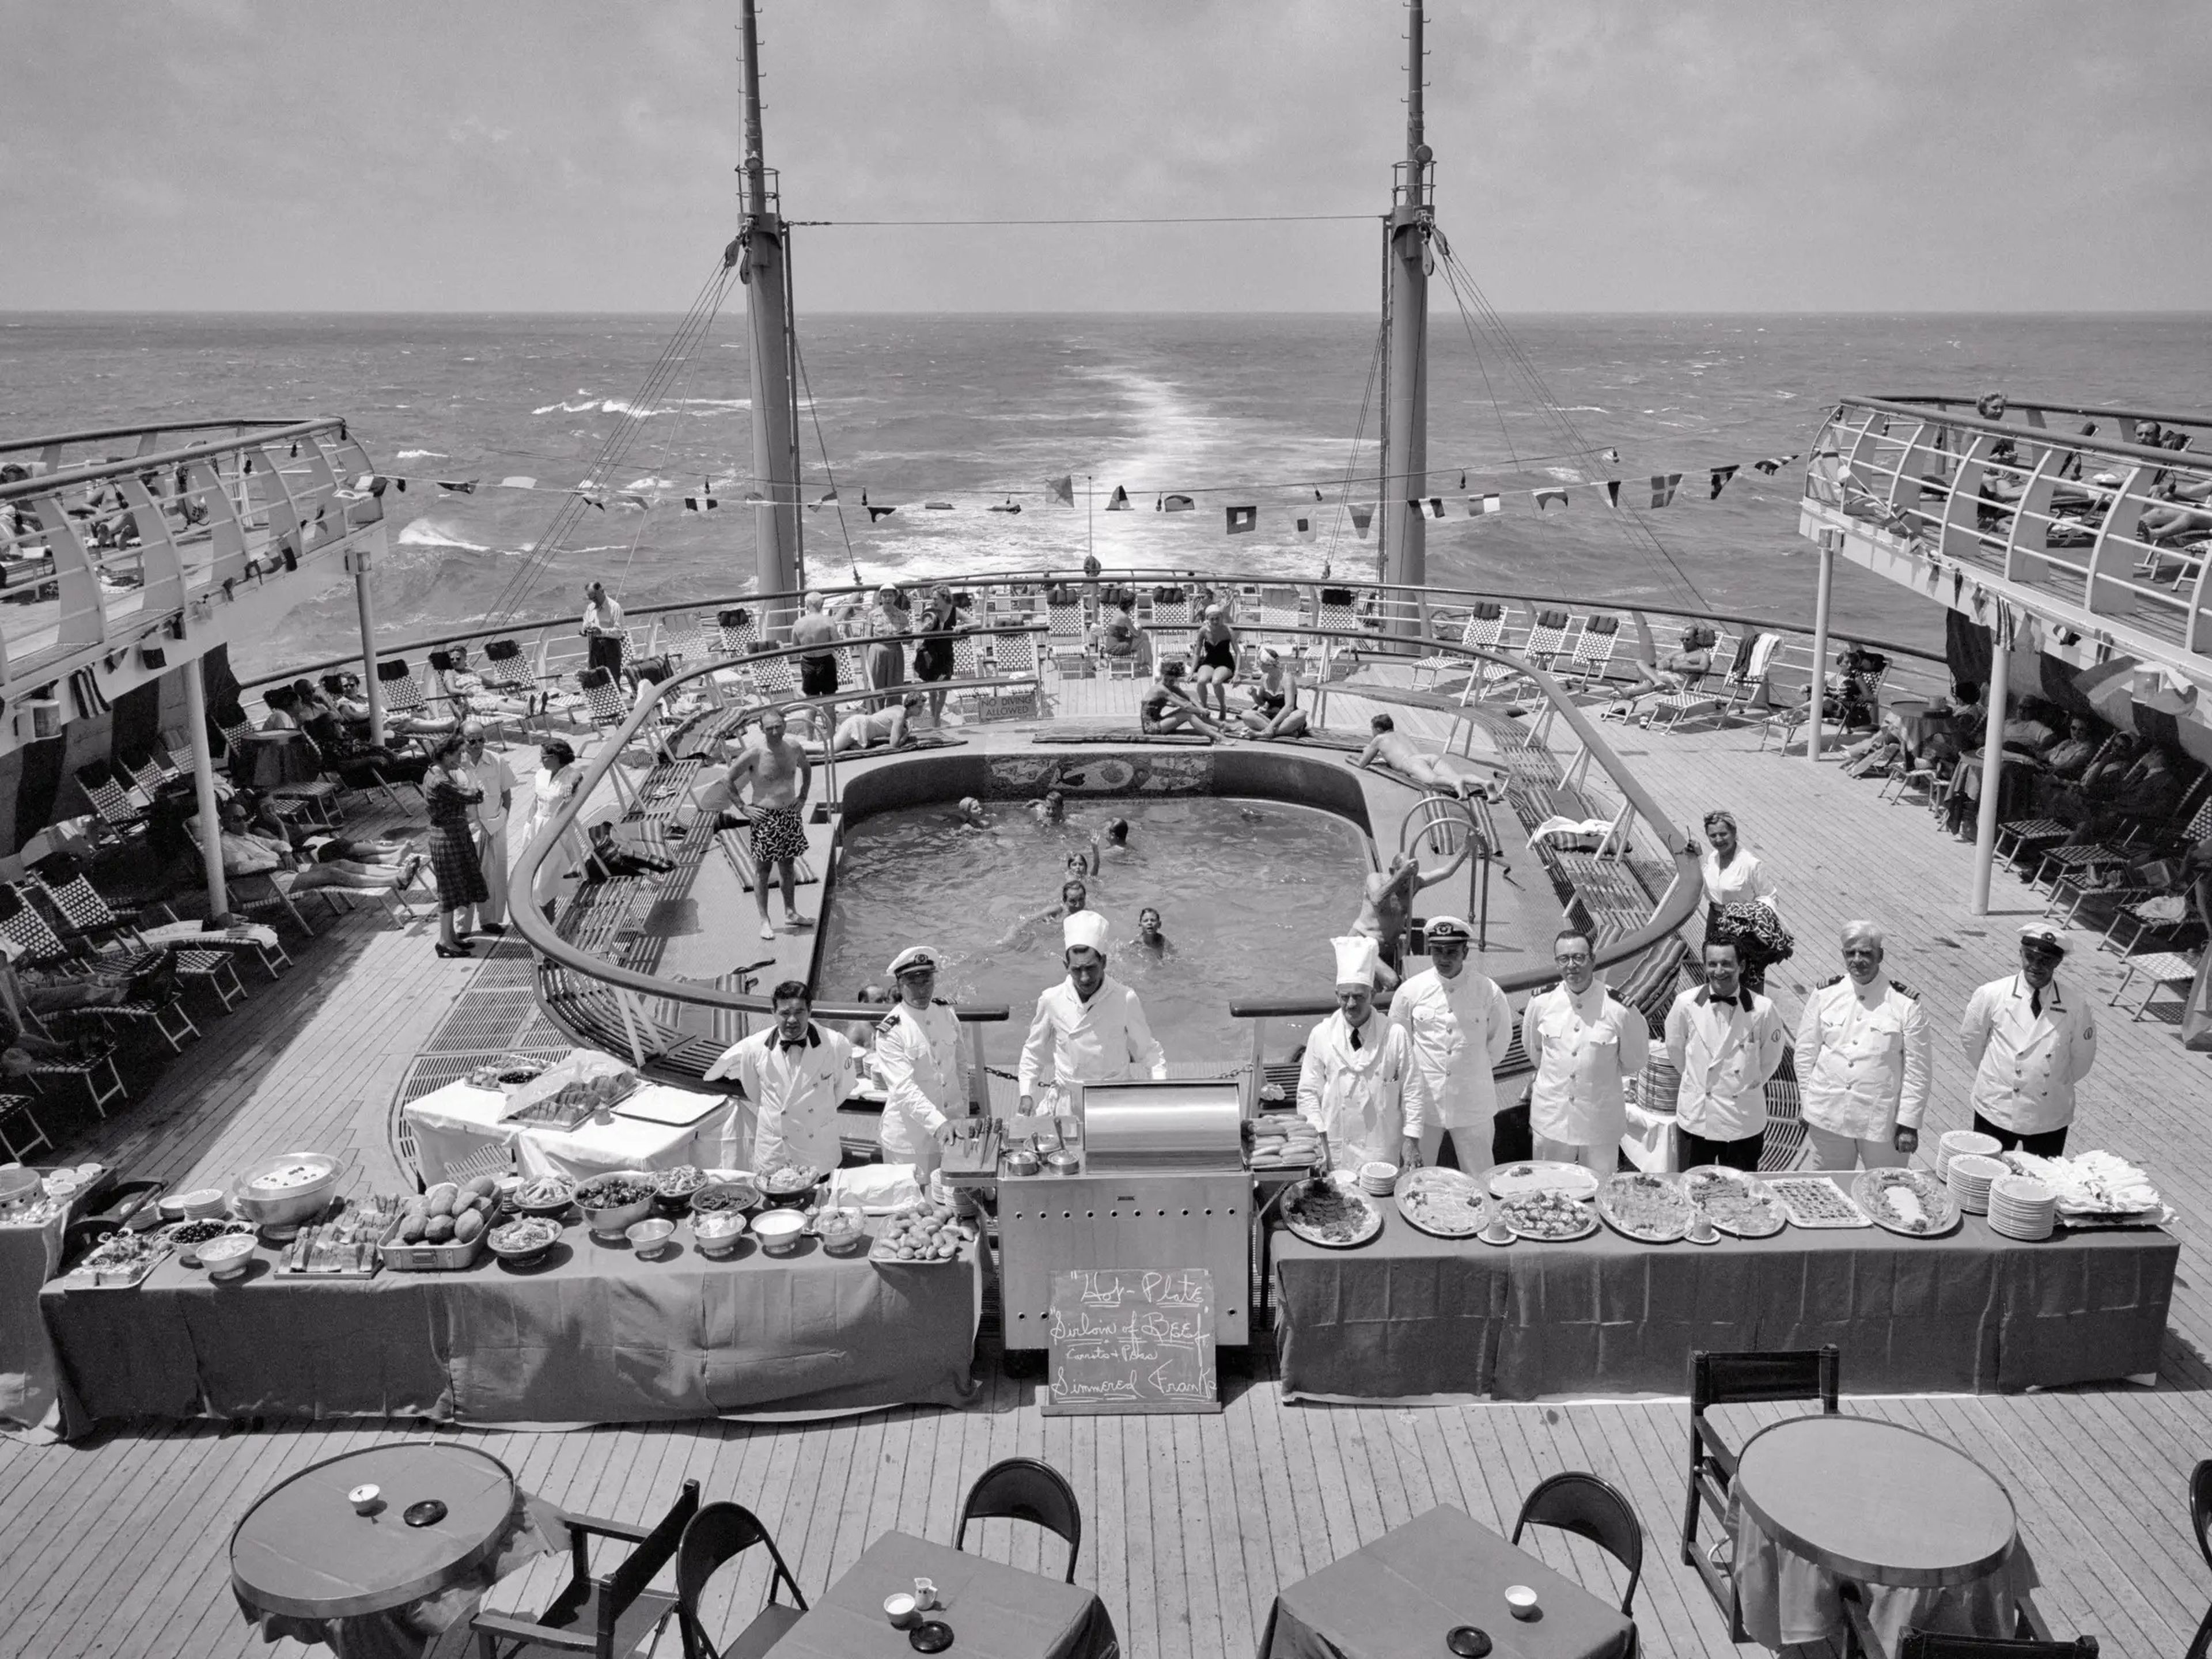 1950s Buffet Lunch Serving Crew Staff Assembled Aboard The Aft Deck By Swimming Pool On The Cruise Ship Independence At Sea.